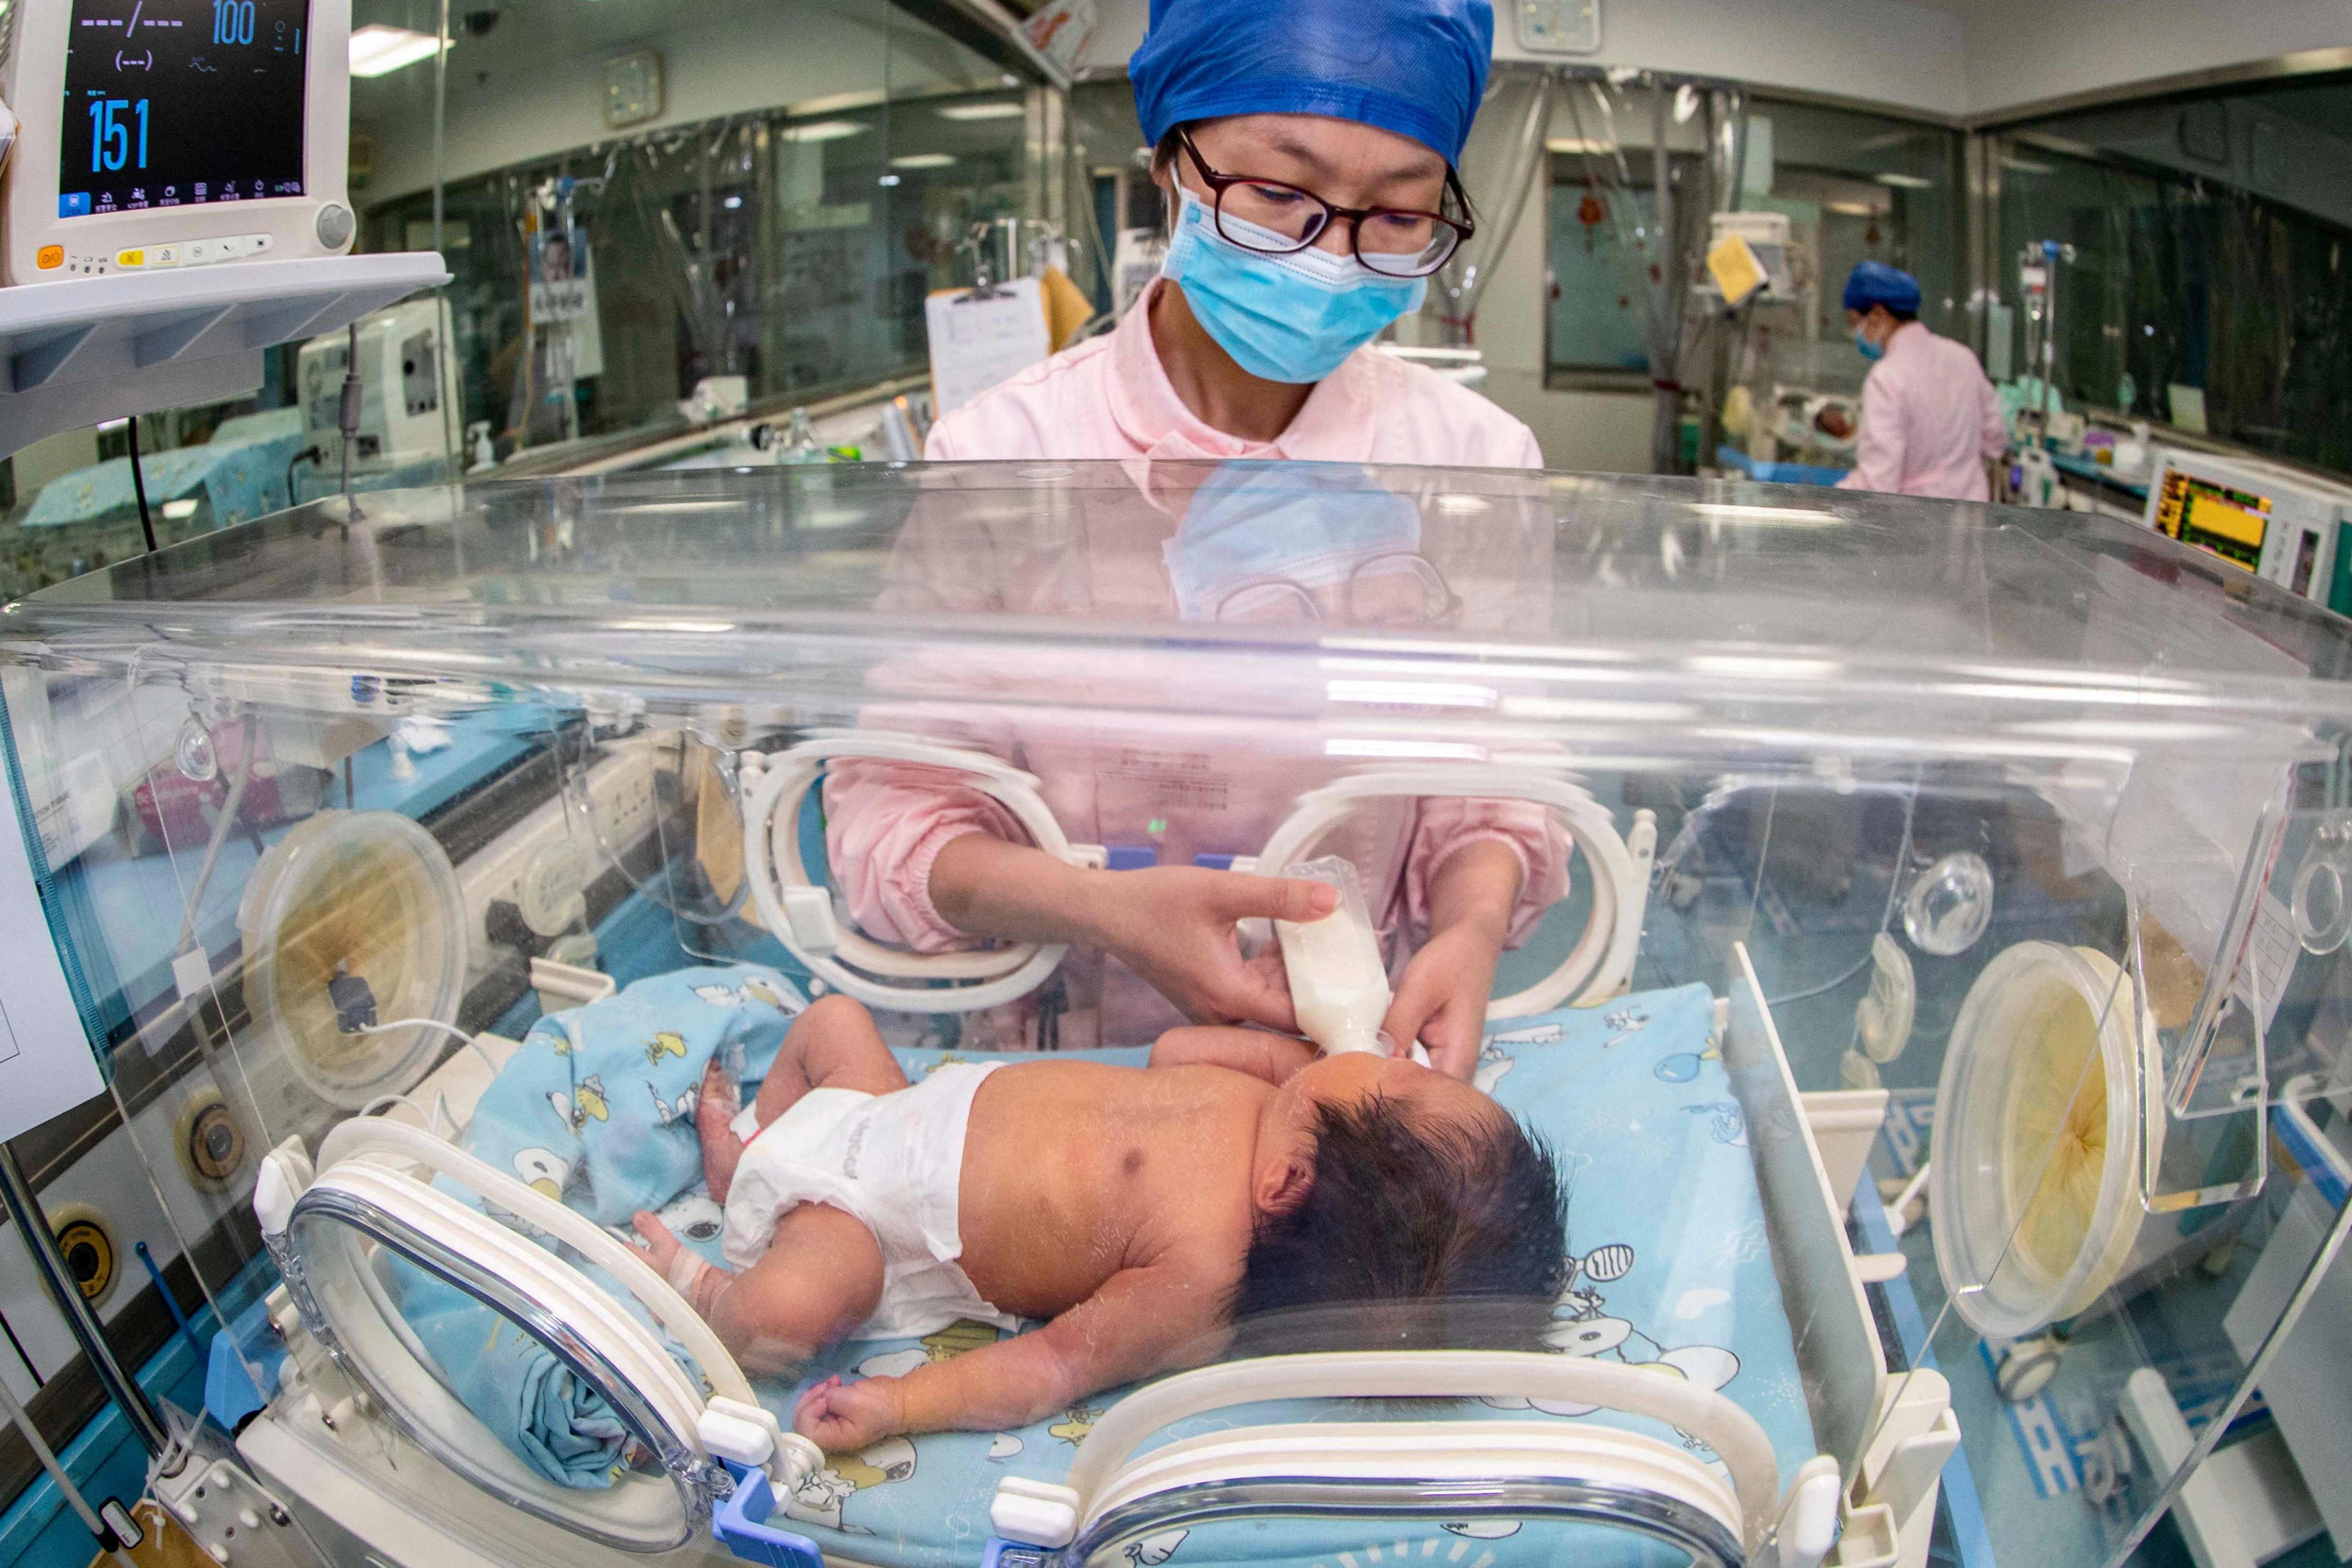 Maternity services are closing around China as birth rates drop in what is being described as an “obstetrics winter”. Photo: AFP